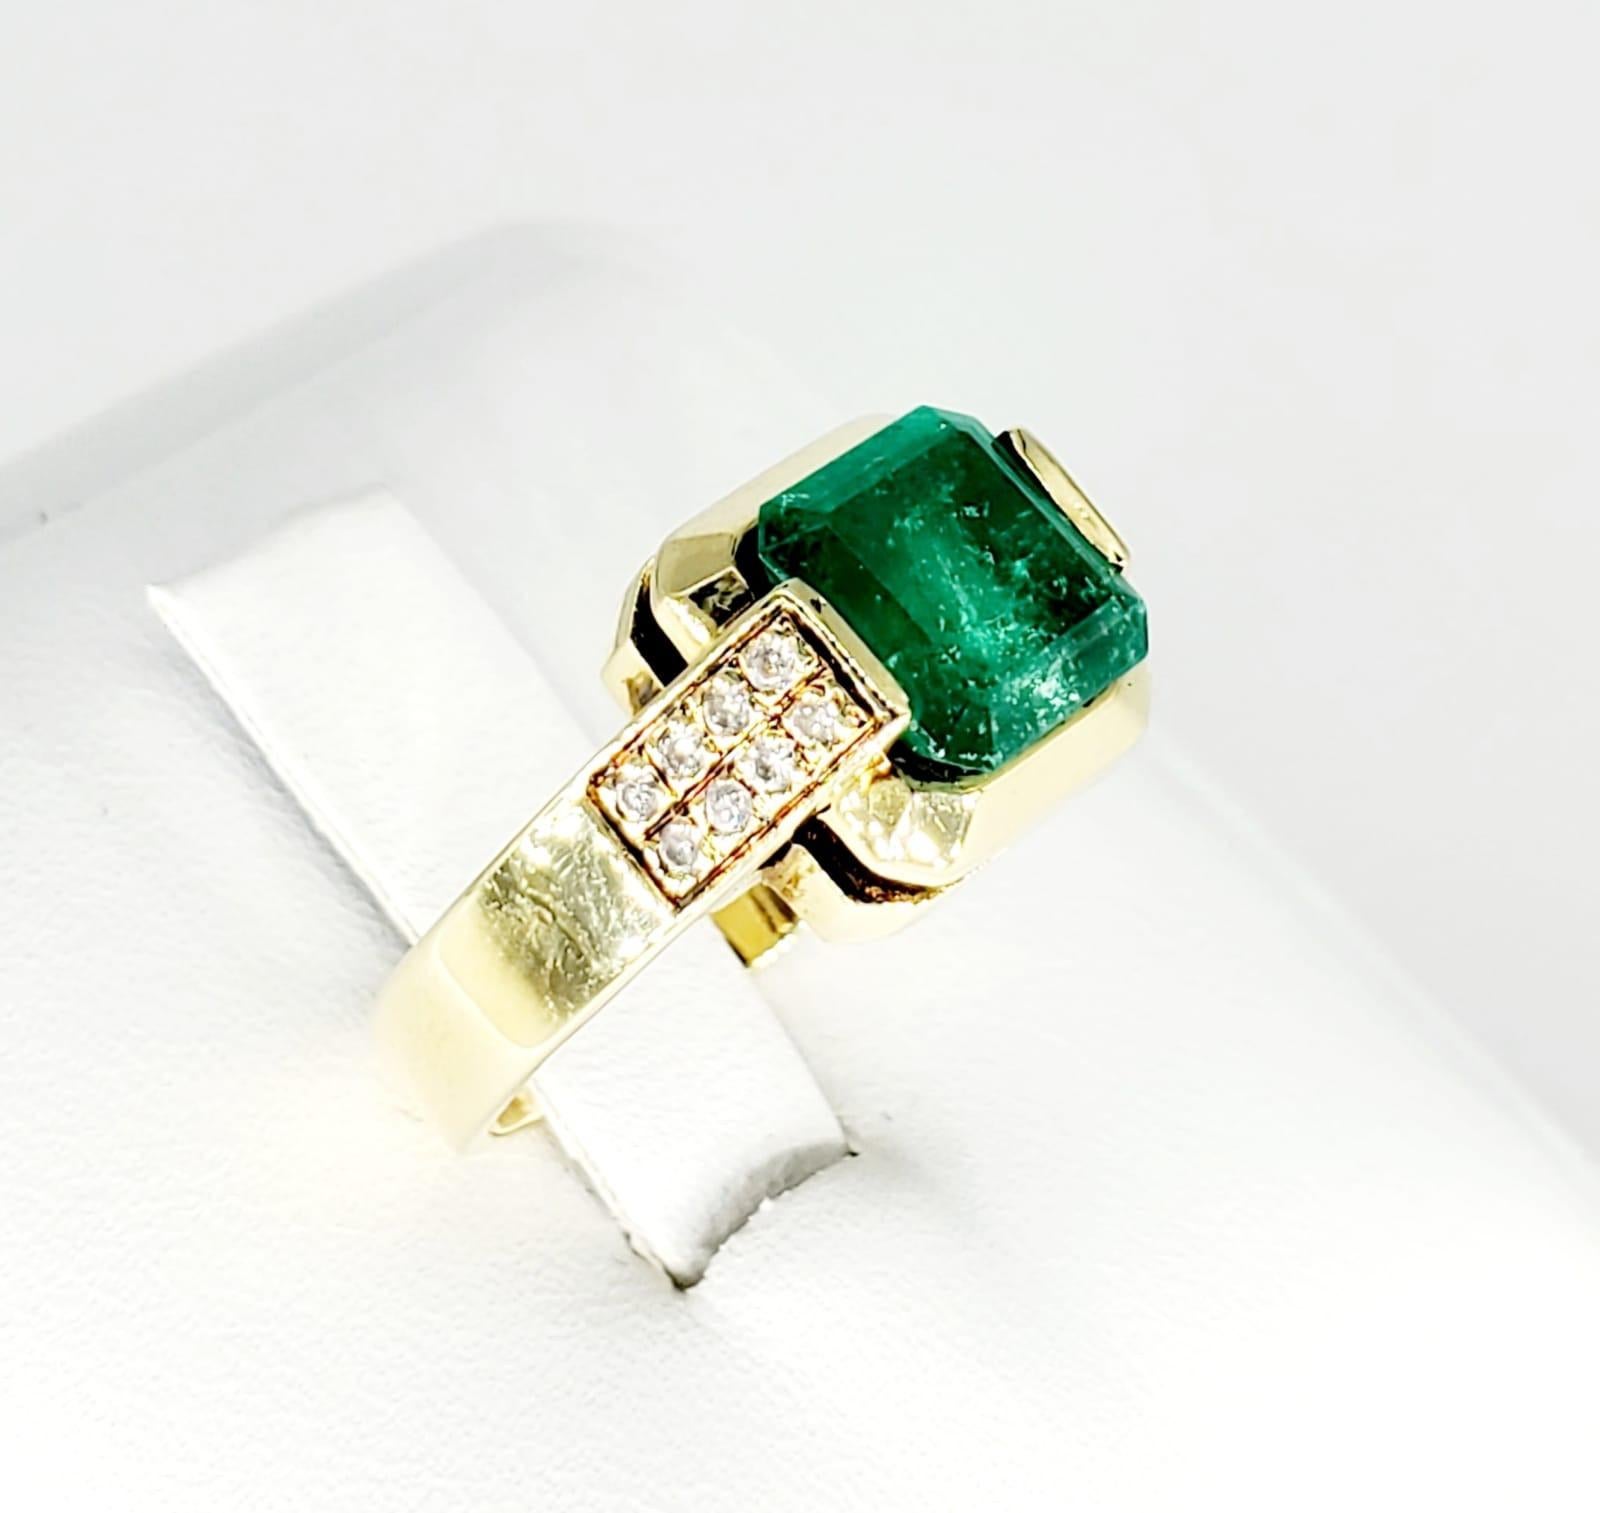 Vintage 2.50 Carat Emerald & Diamonds 18k Gold Ring. The ring features total cataract weight of 0.30 Diamonds and 2.20 carat approx emerald center stone. The ring weights 8.1 grams 18k solid gold and is a size 6 1/2